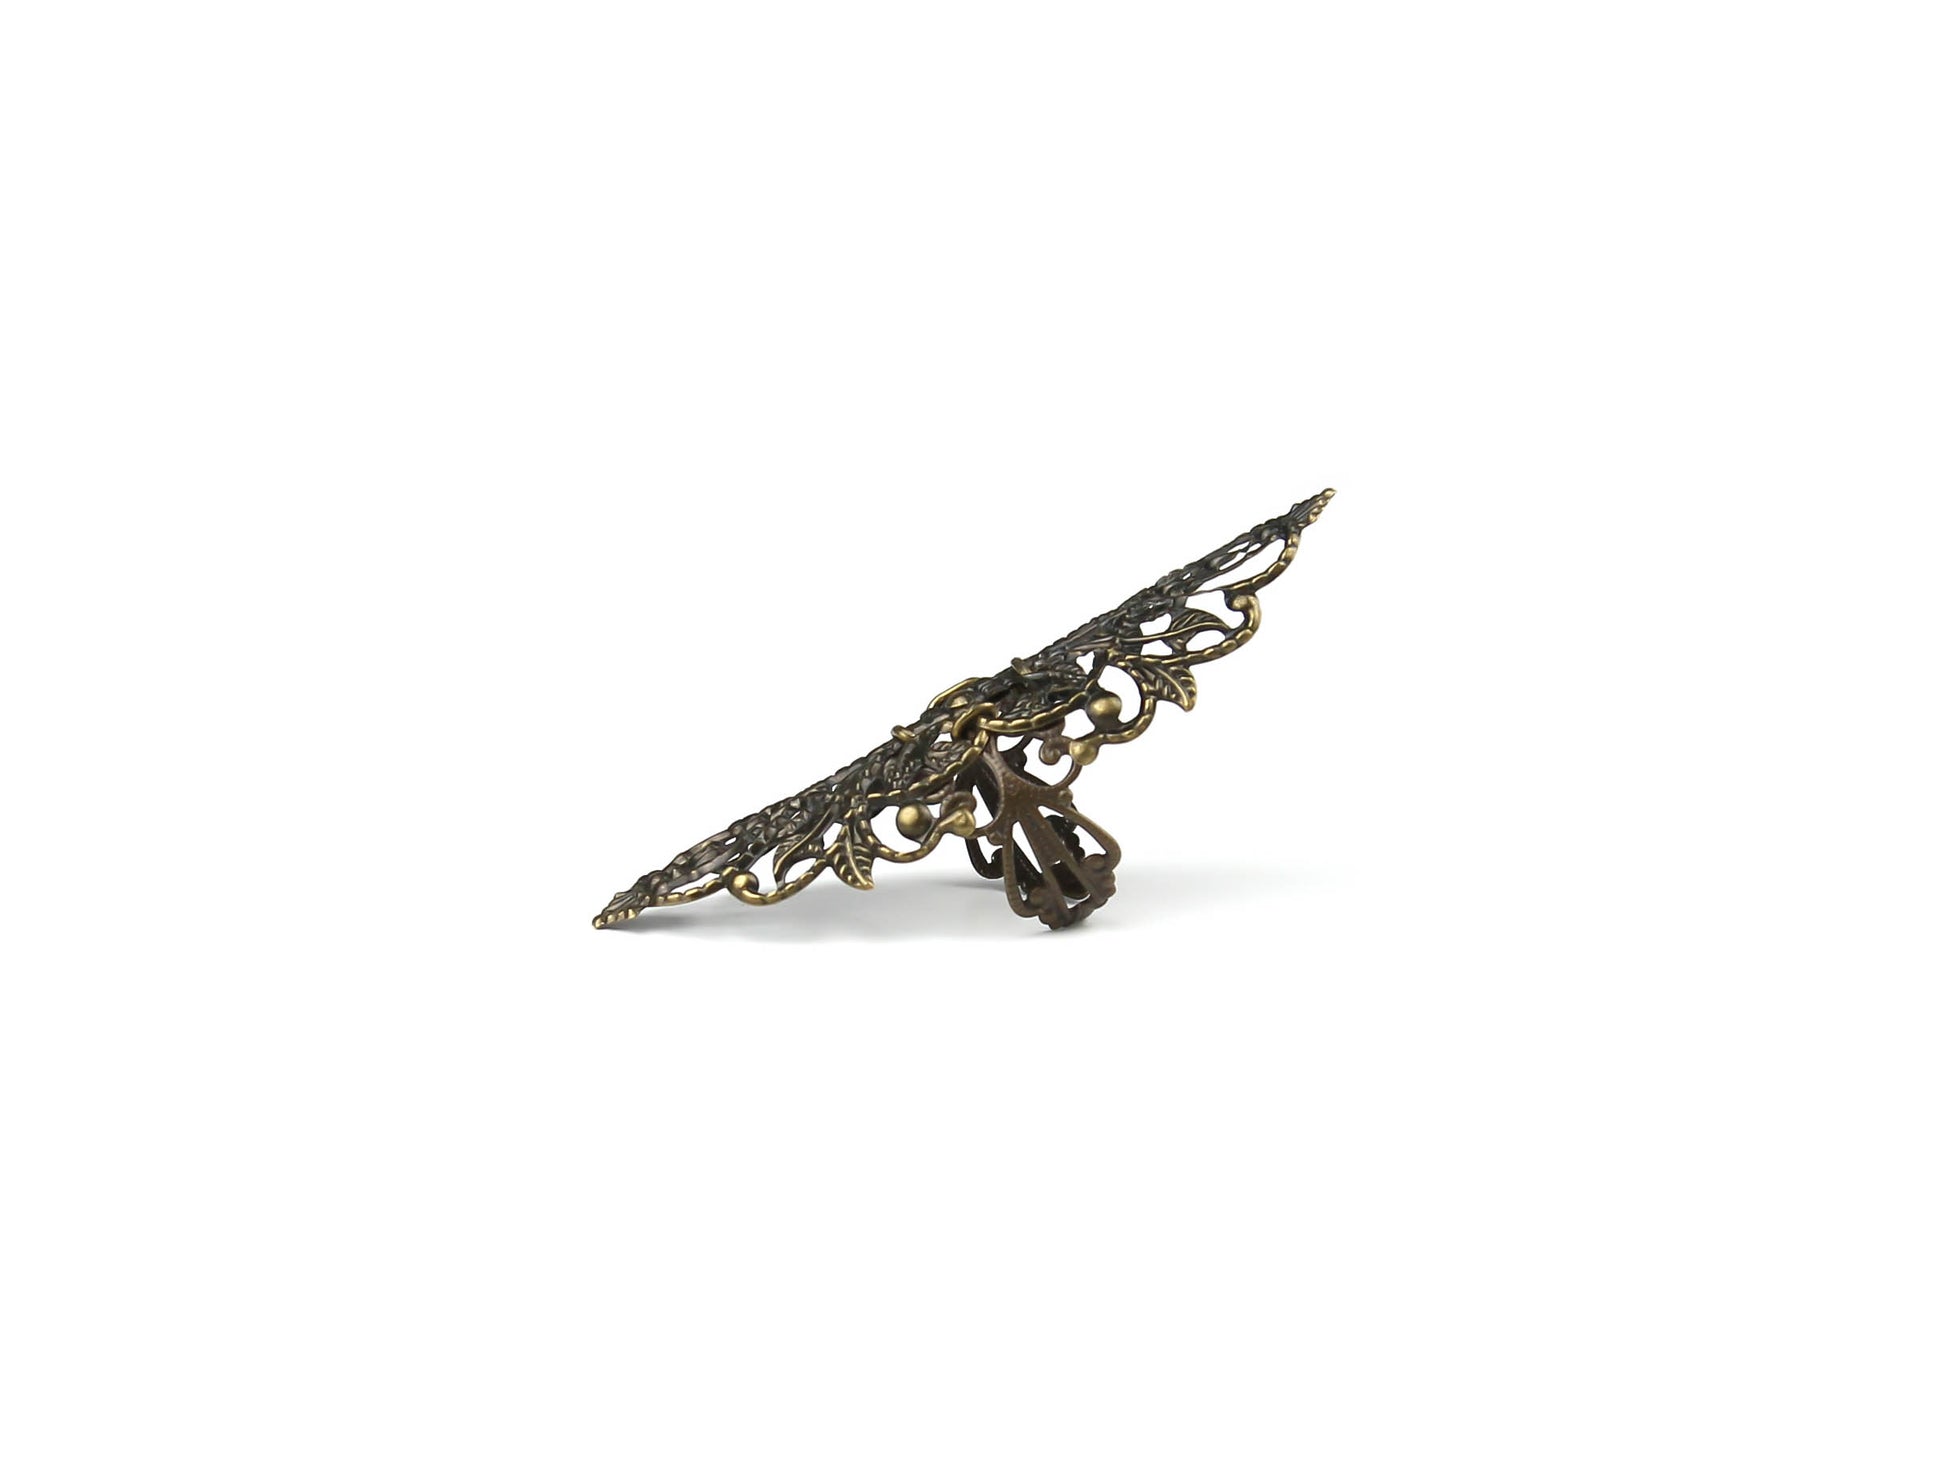 An elegantly crafted wide bronze gothic ring from Myril Jewels, this piece is a stunning accessory for those with a love for neo-gothic and alternative styles. It's an ideal complement to a Halloween ensemble or punk attire, perfect for daily wear in a minimal goth wardrobe, and a standout choice for festivals or rave parties. This ring serves as a thoughtful, bold gift for the witchcore-adoring goth girlfriend or friend.